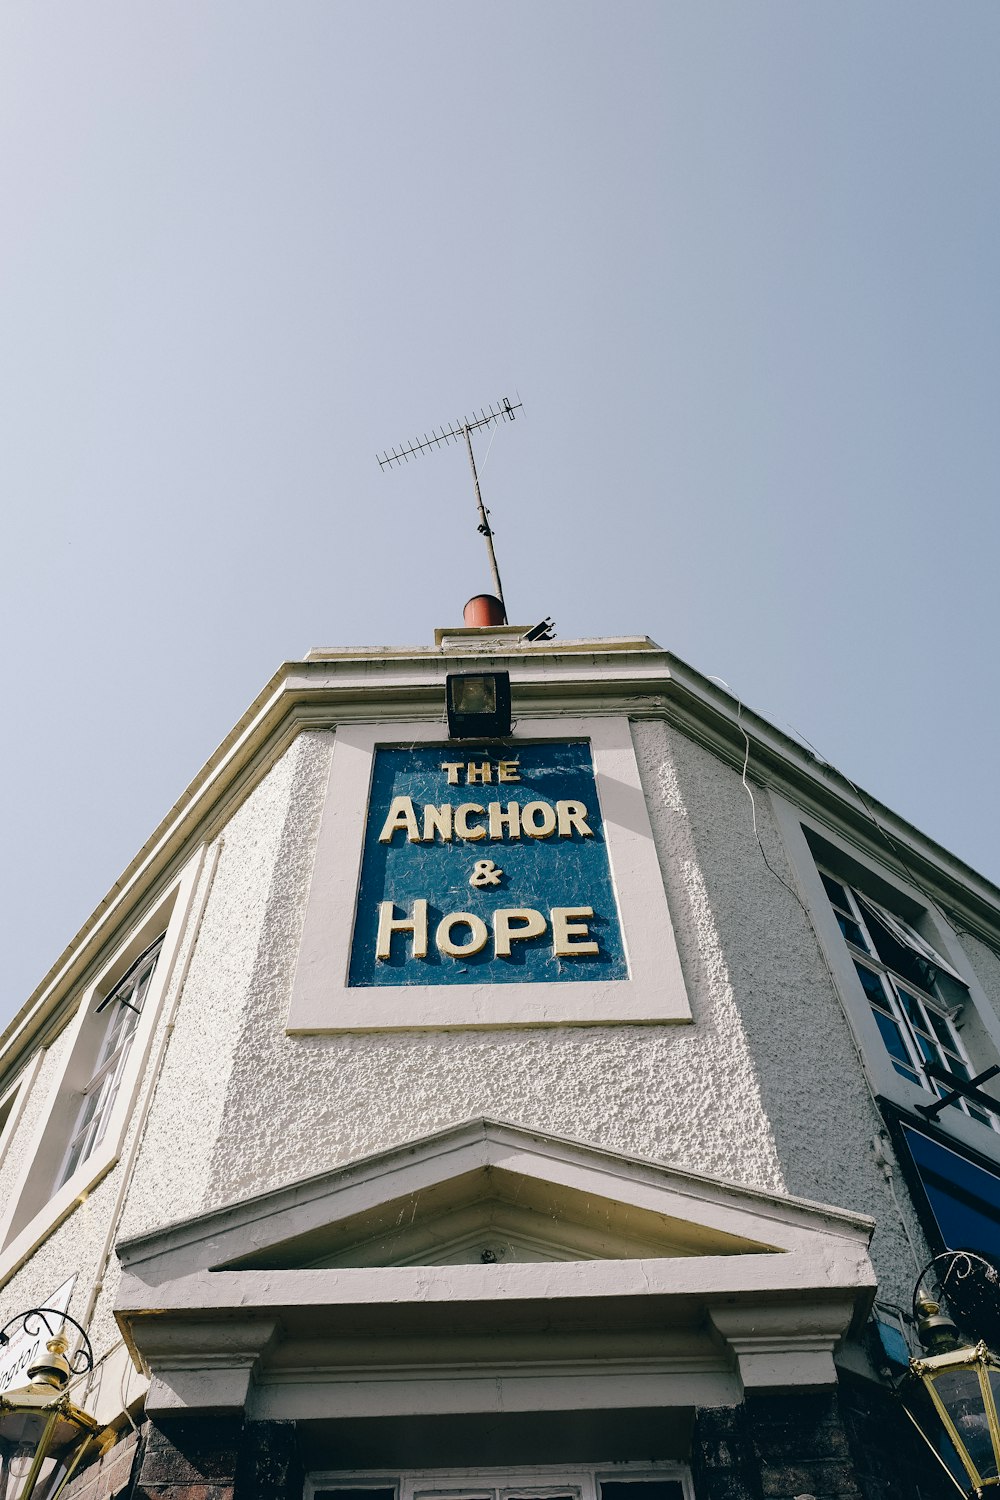 the anchor and hope sign on the side of a building